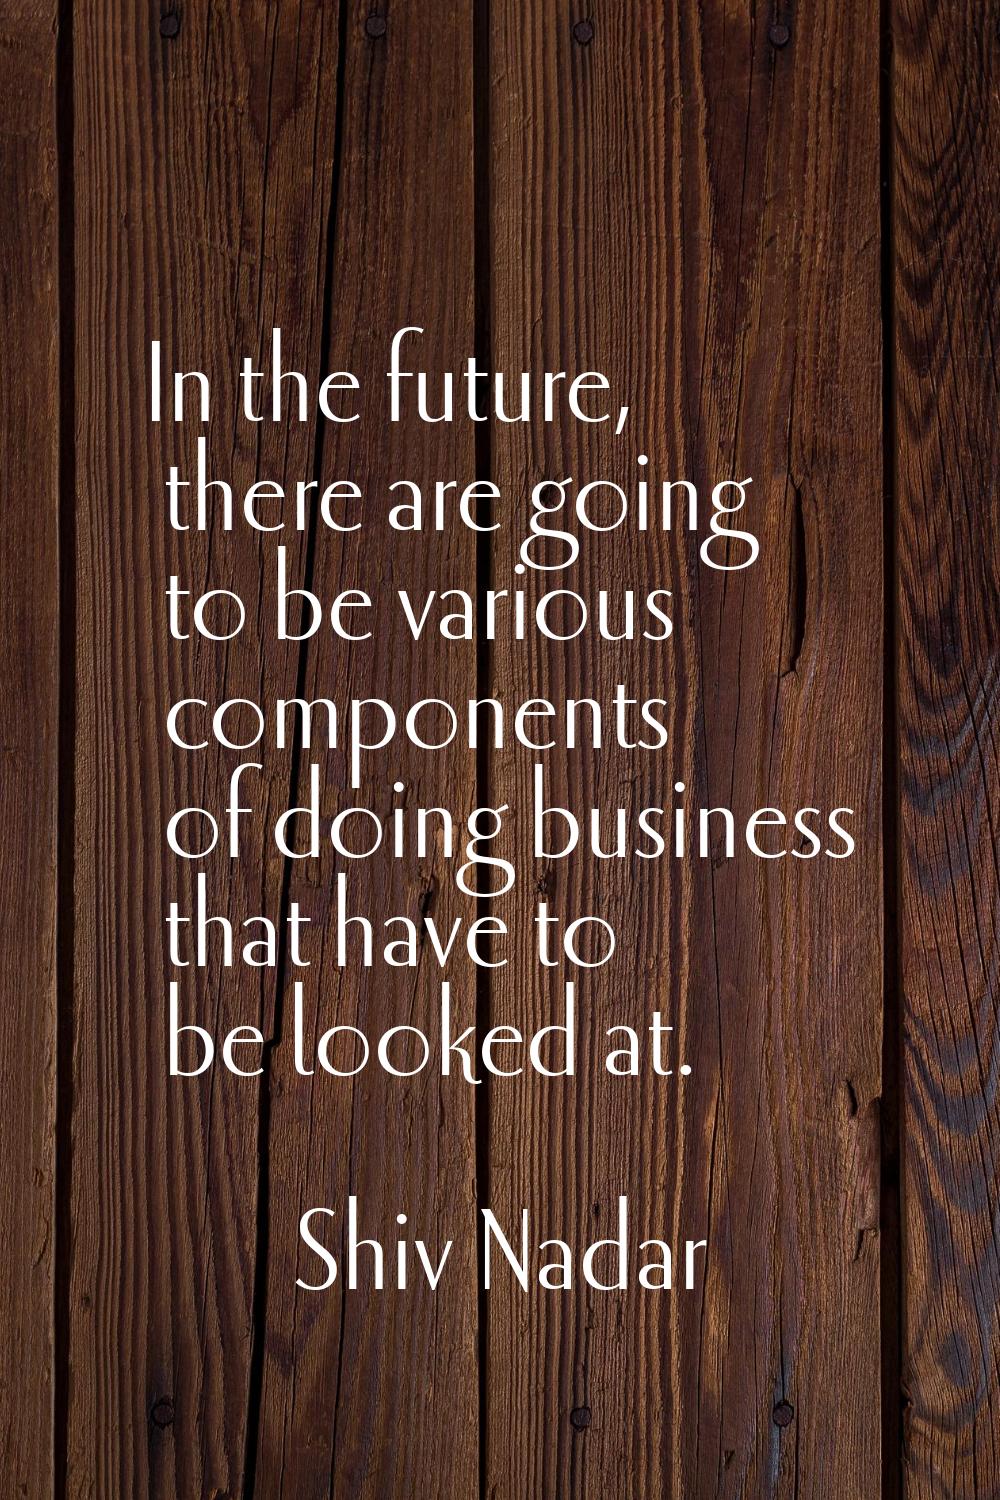 In the future, there are going to be various components of doing business that have to be looked at